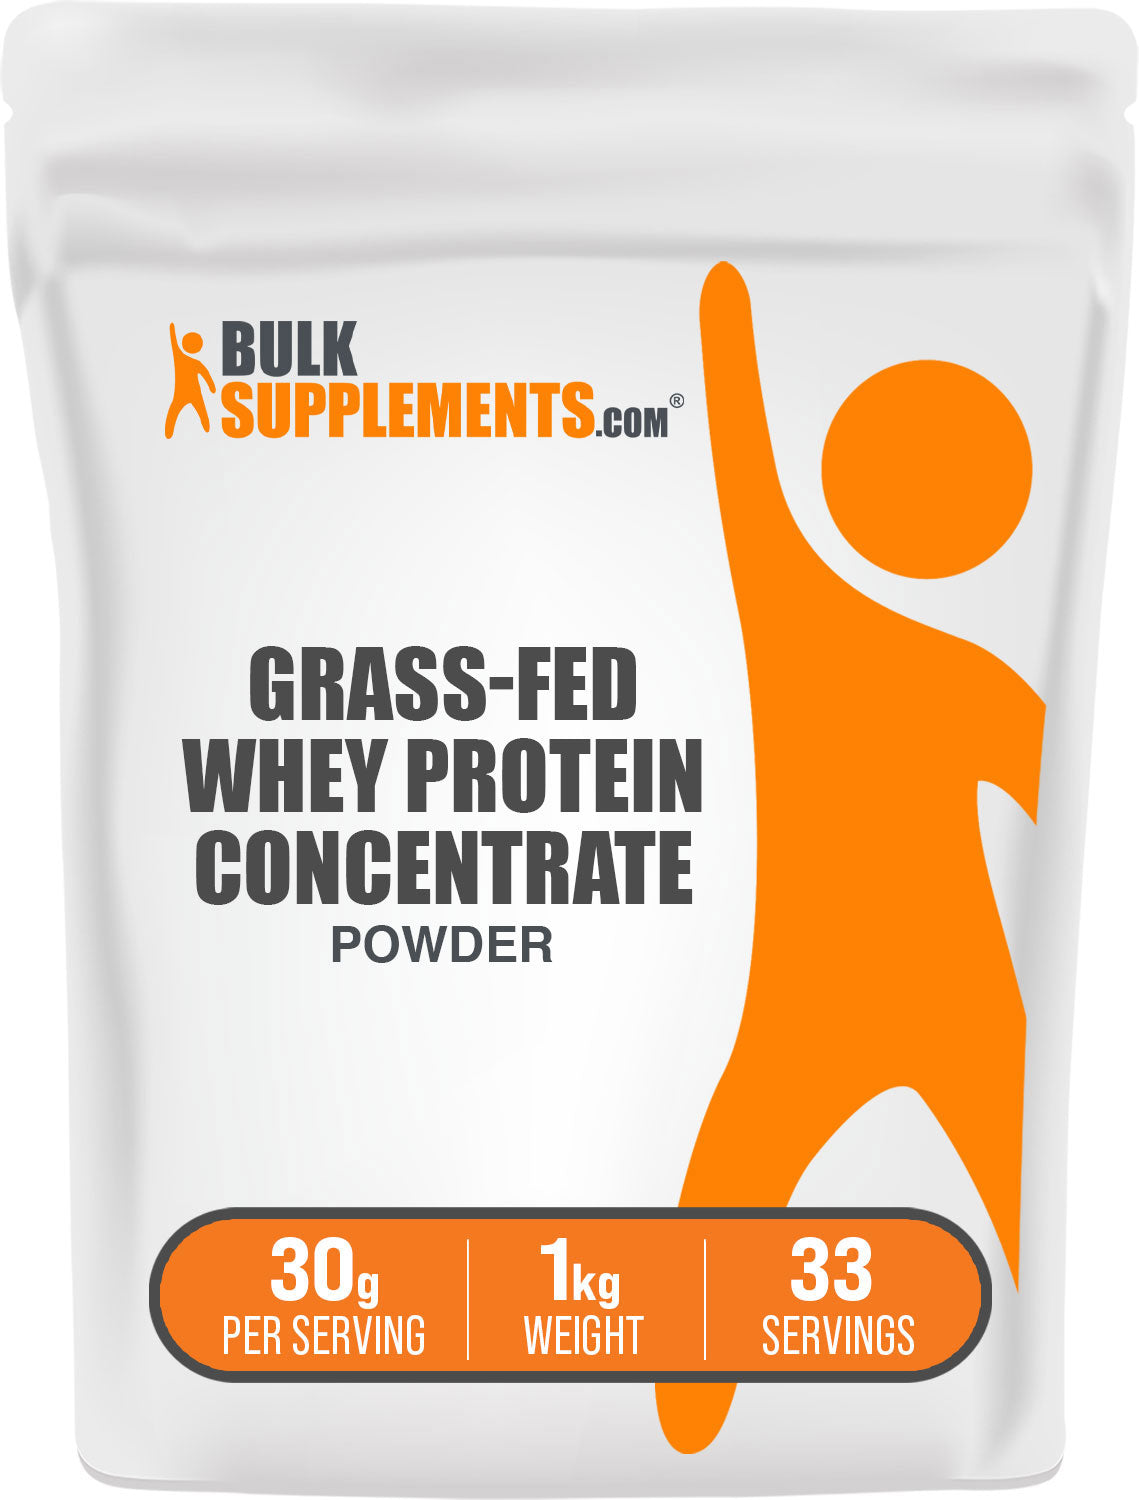 Grass-Fed Whey Protein Isolate Powder